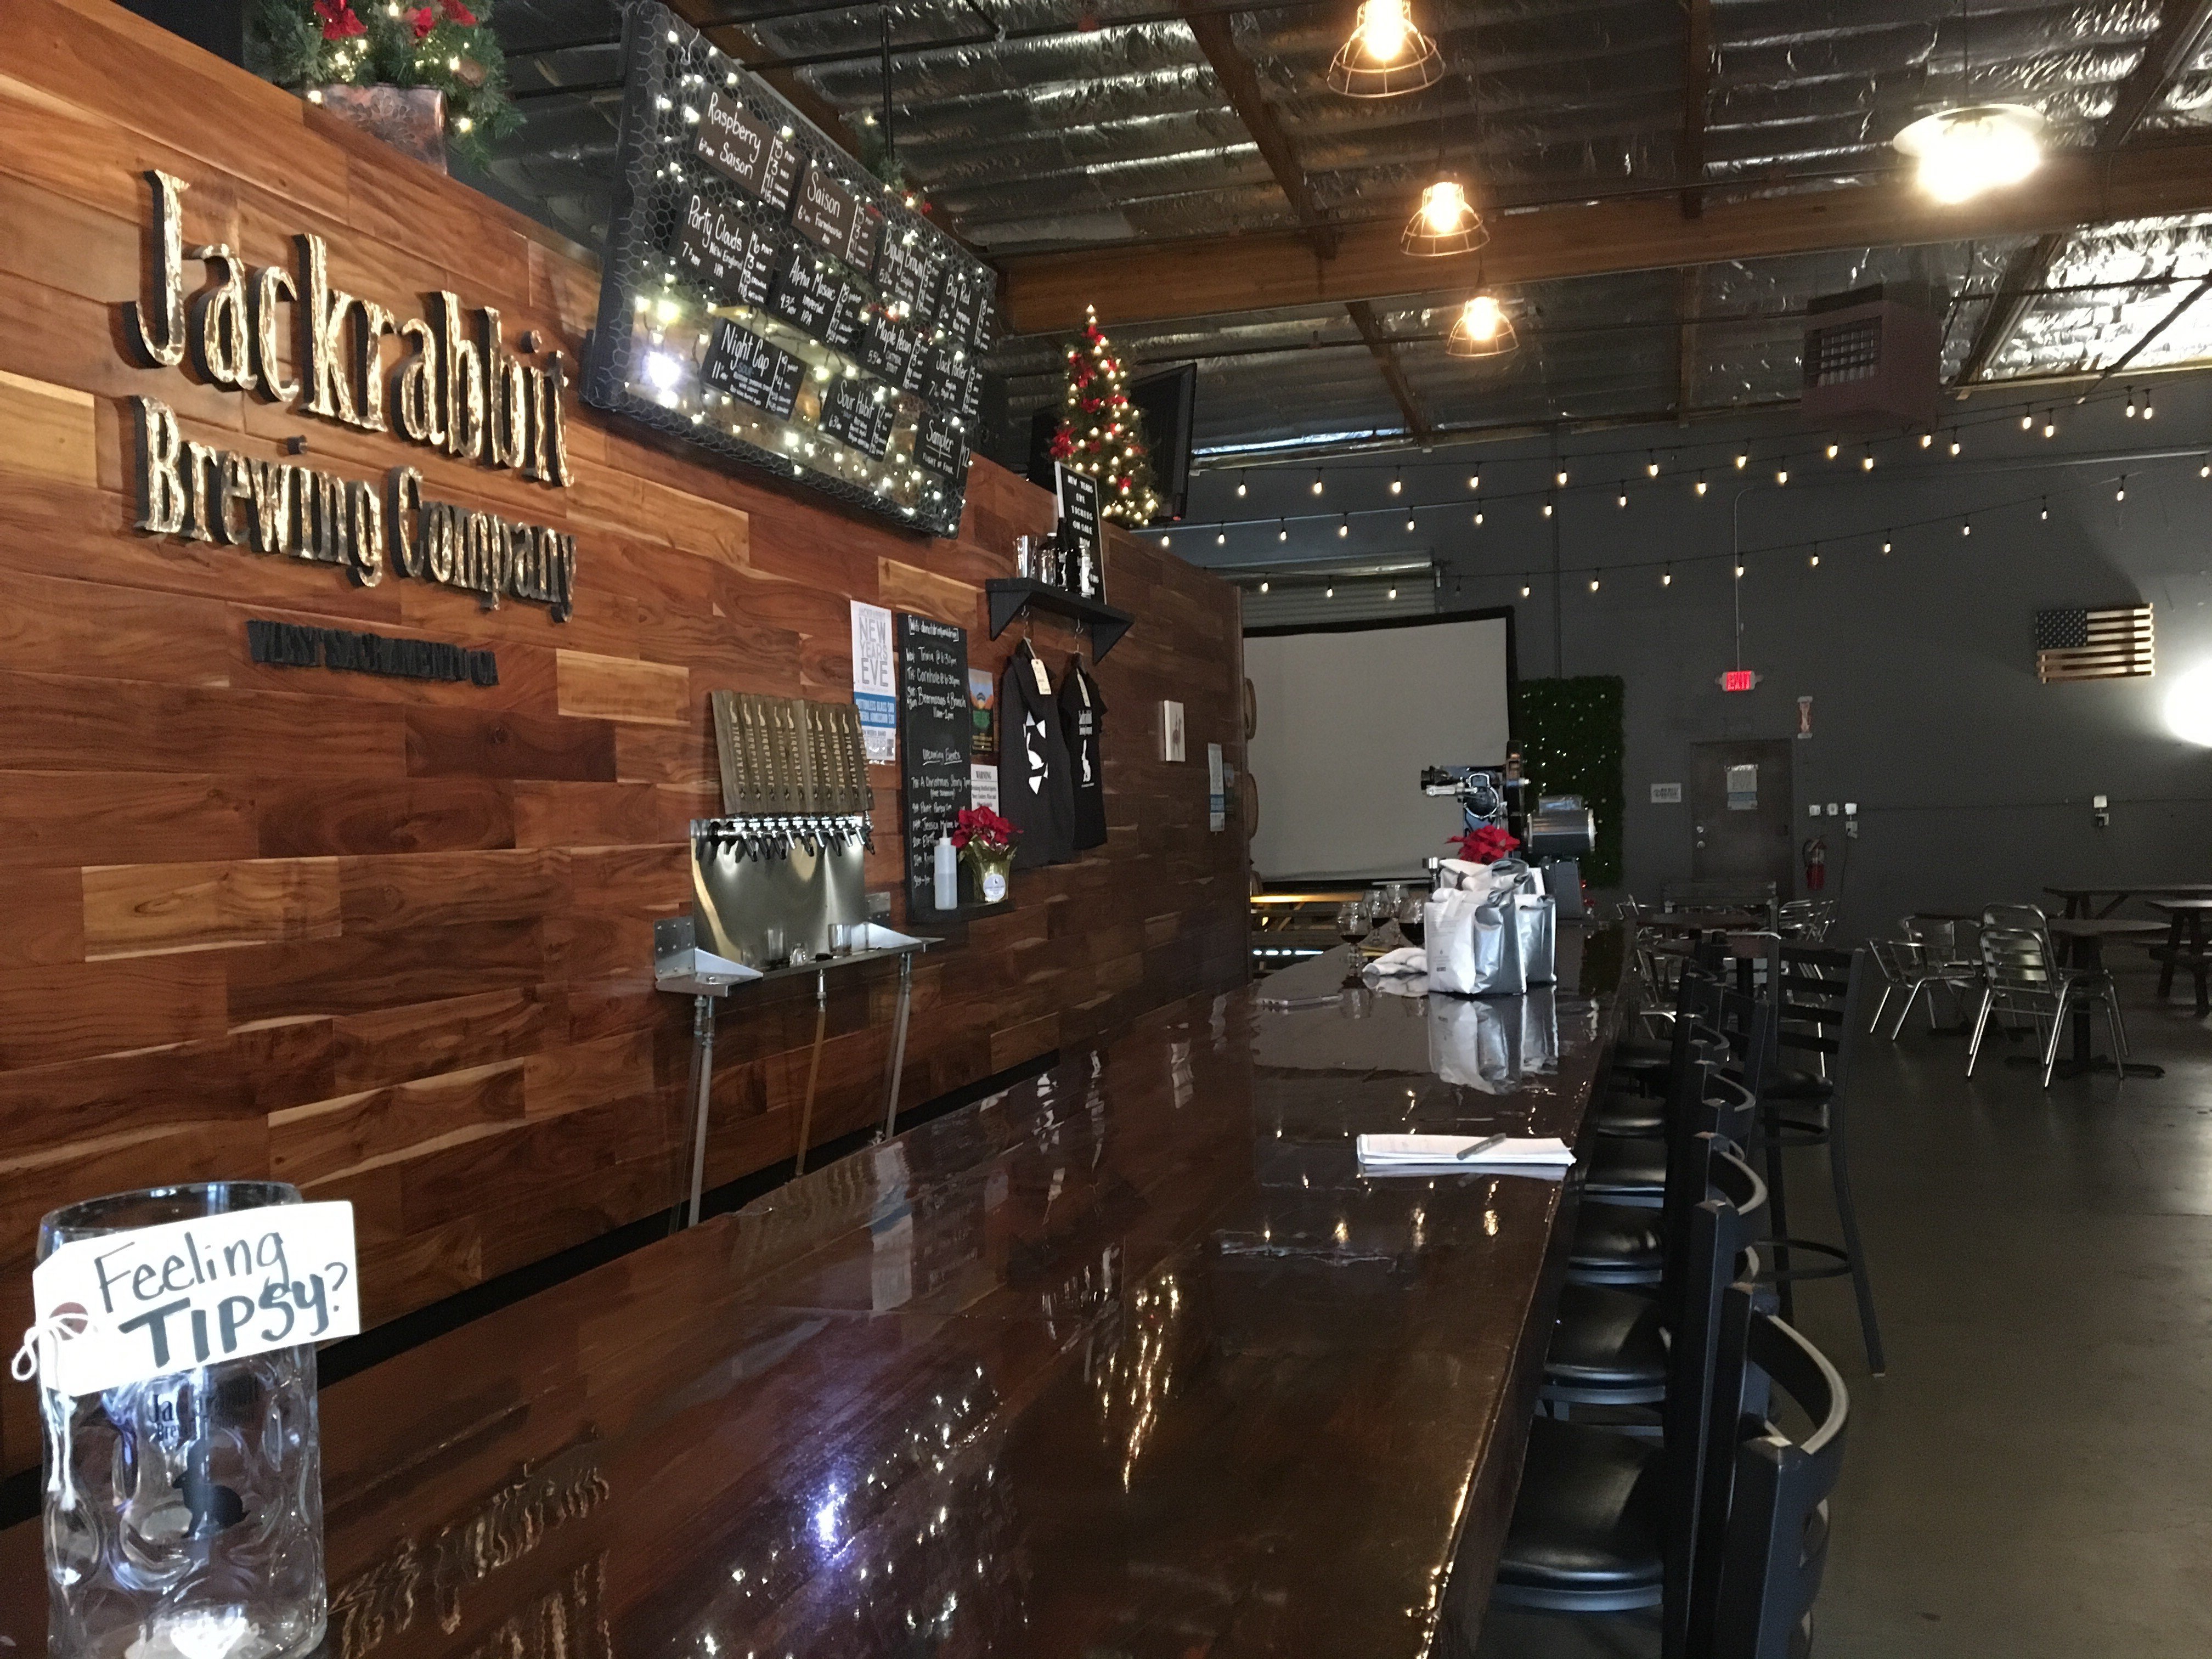 Jackrabbit Brewing brewery from United States